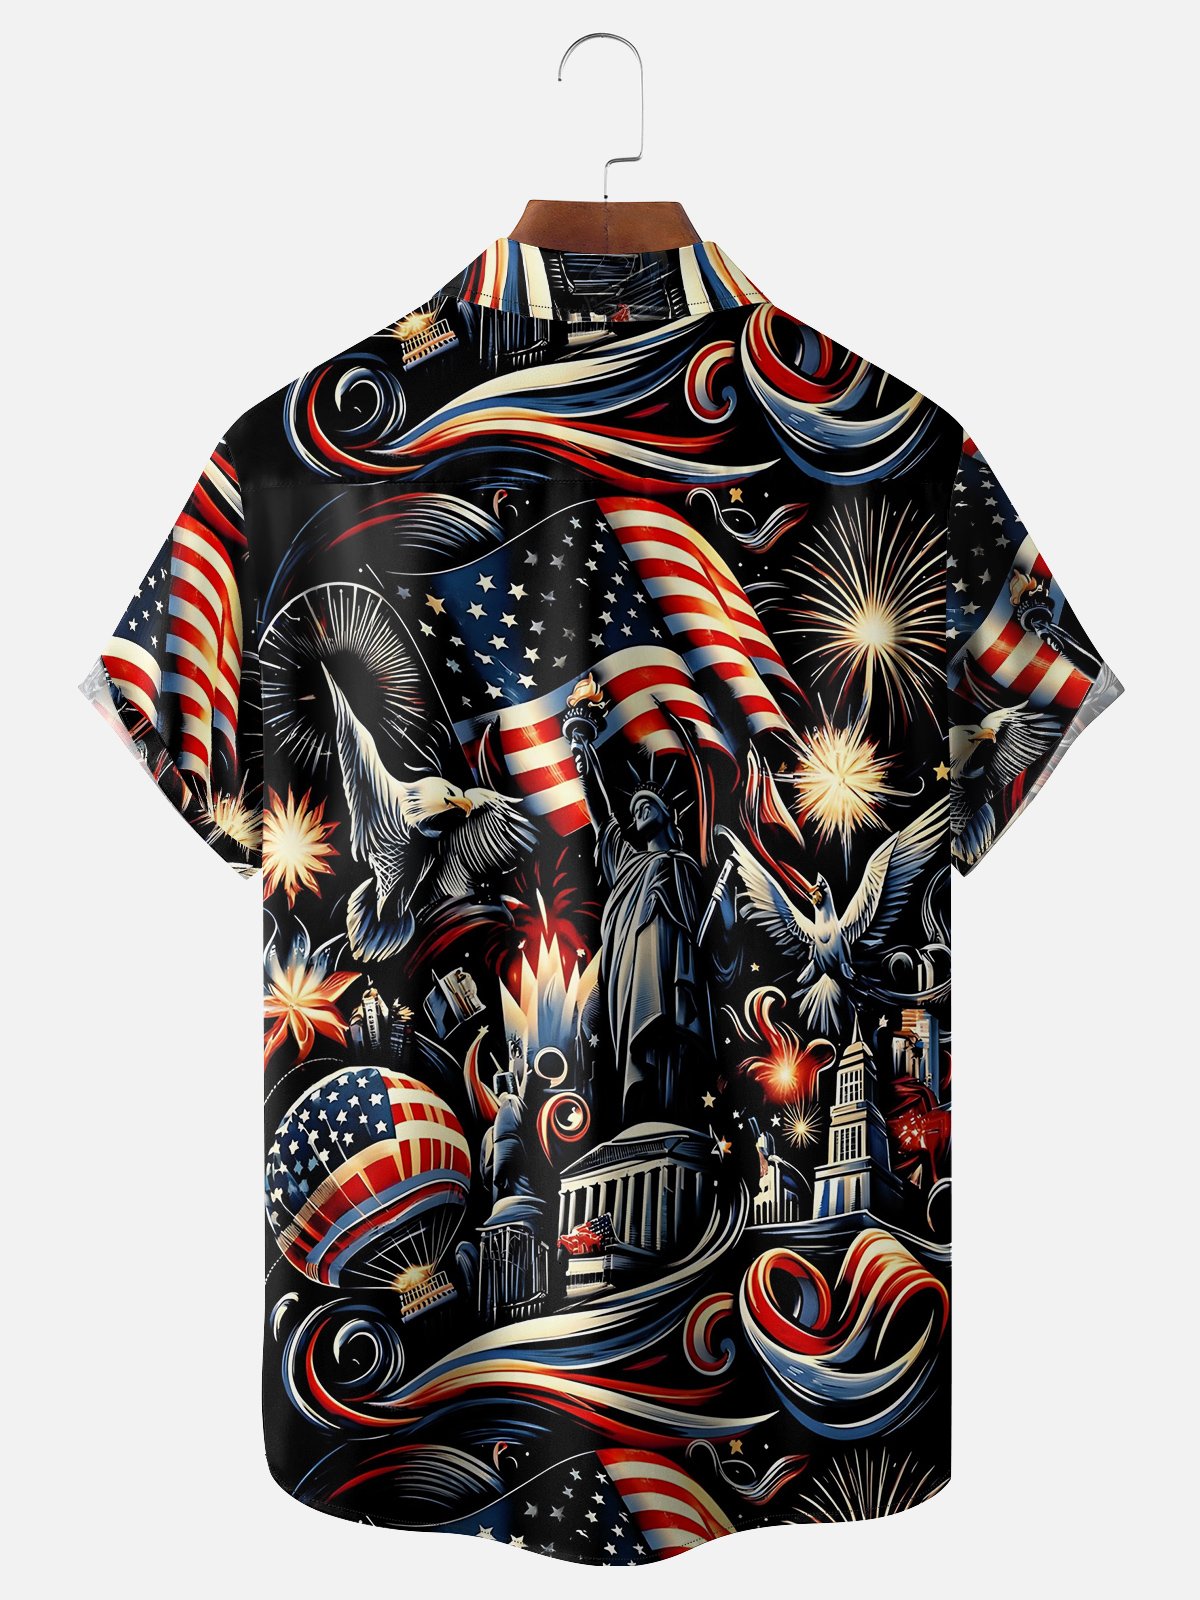 Hardaddy Moisture-wicking Abstract American Flag Fireworks Eagle Statue of Liberty Chest Pocket Hawaiian Shirt